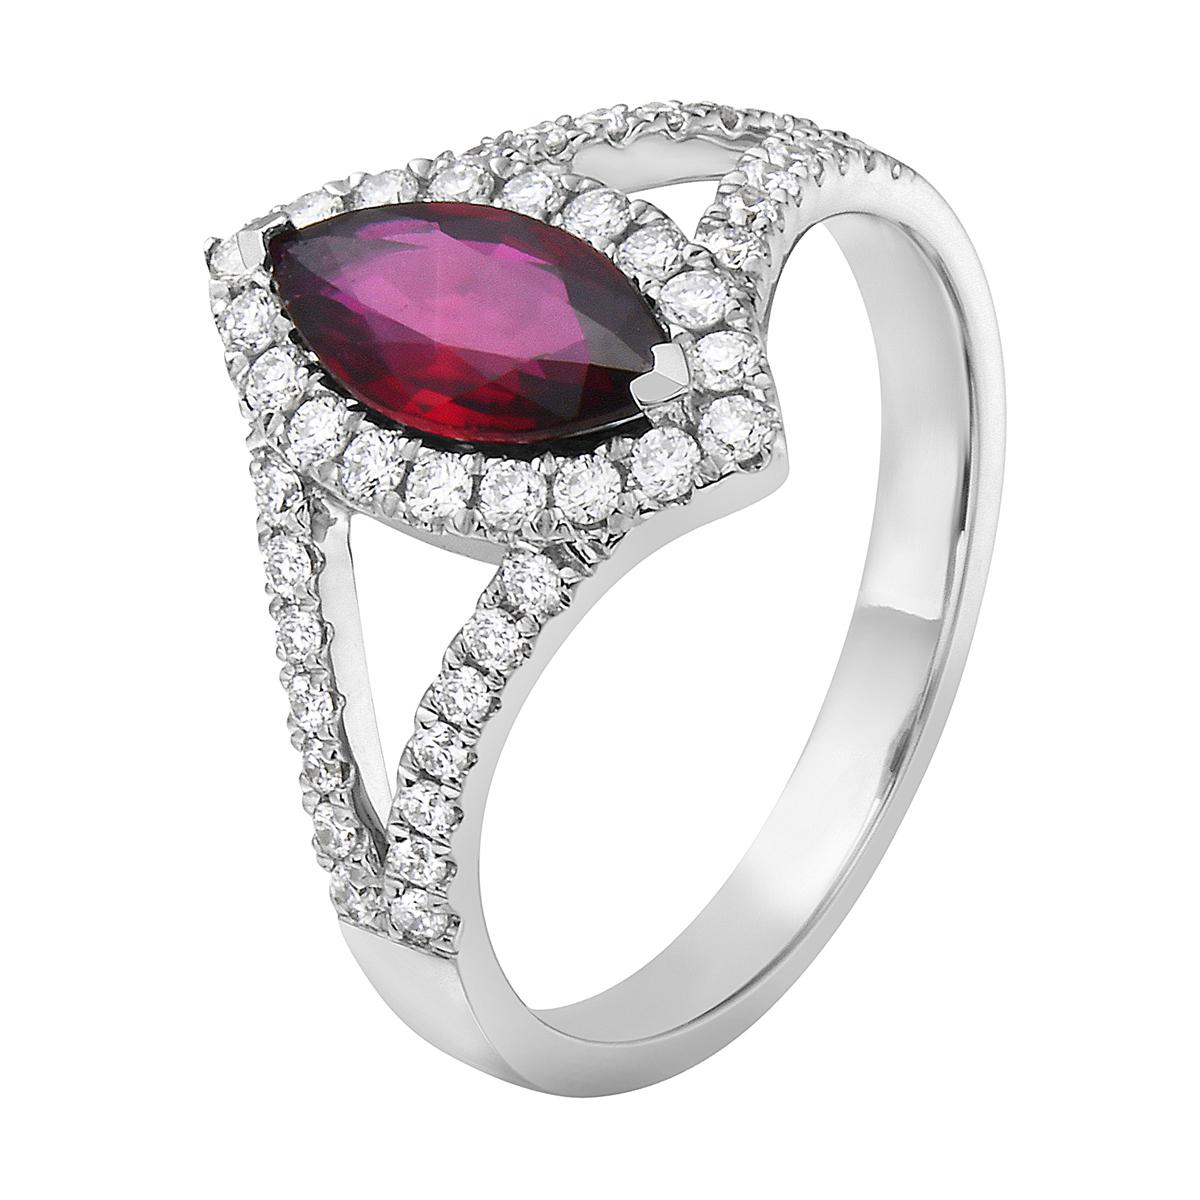 With this exquisite diamond and ruby ring, style and glamour are in the spotlight. This 18-karat diamond and ruby ring is made from 3.7 grams of gold. This ring is adorned with VS2, G color diamonds, made out of 40 diamonds totaling 0.39 carats, and